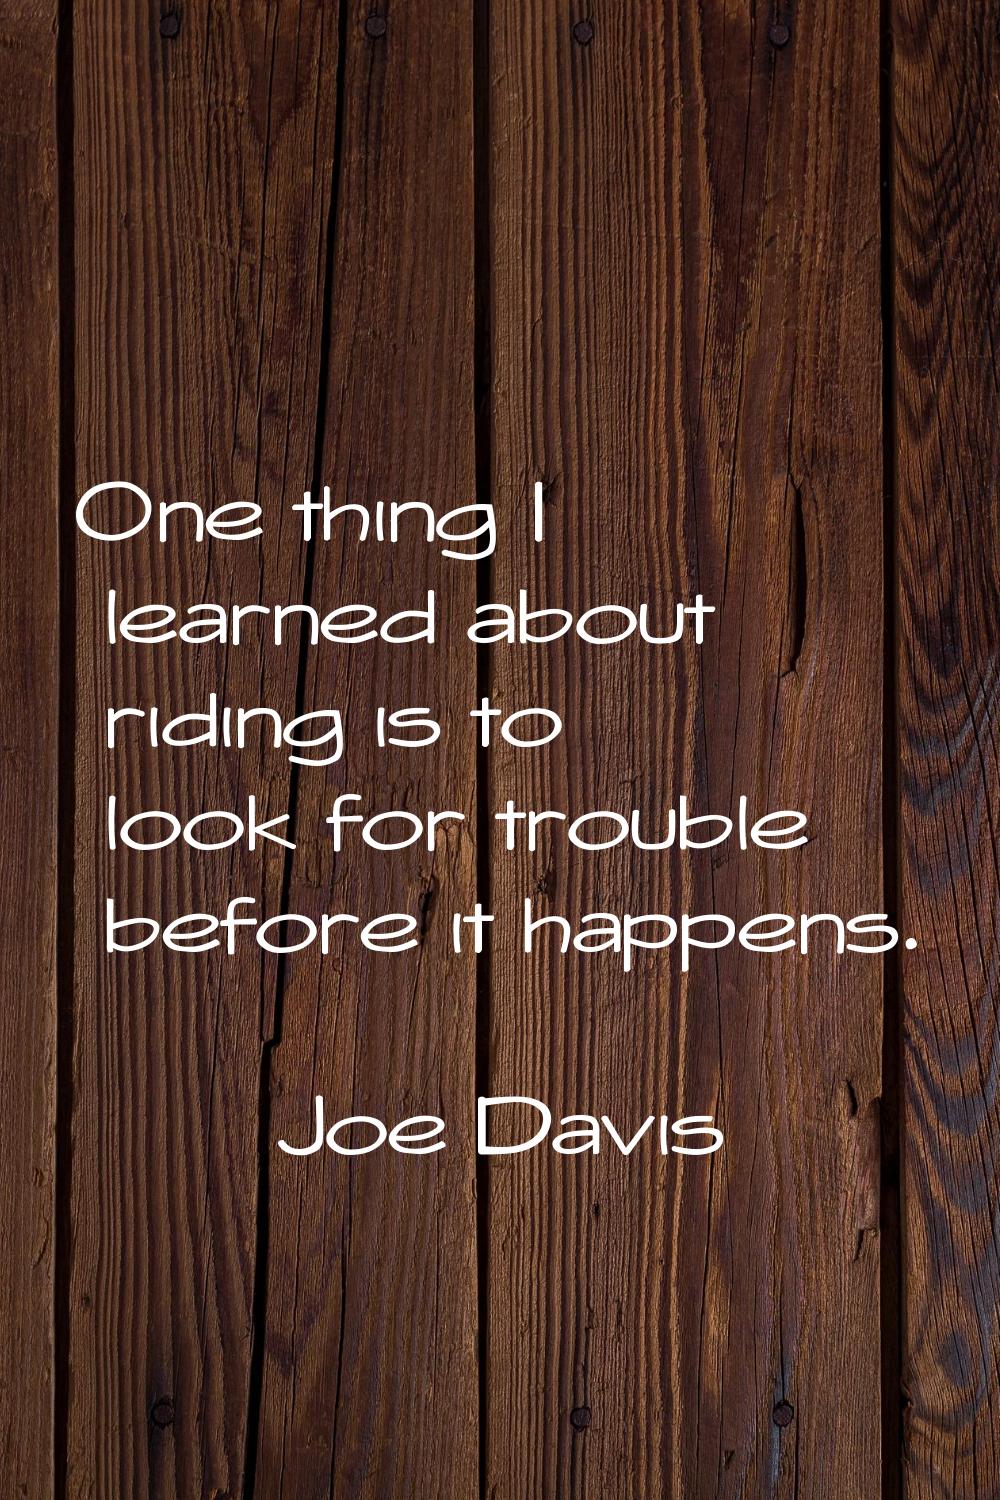 One thing I learned about riding is to look for trouble before it happens.